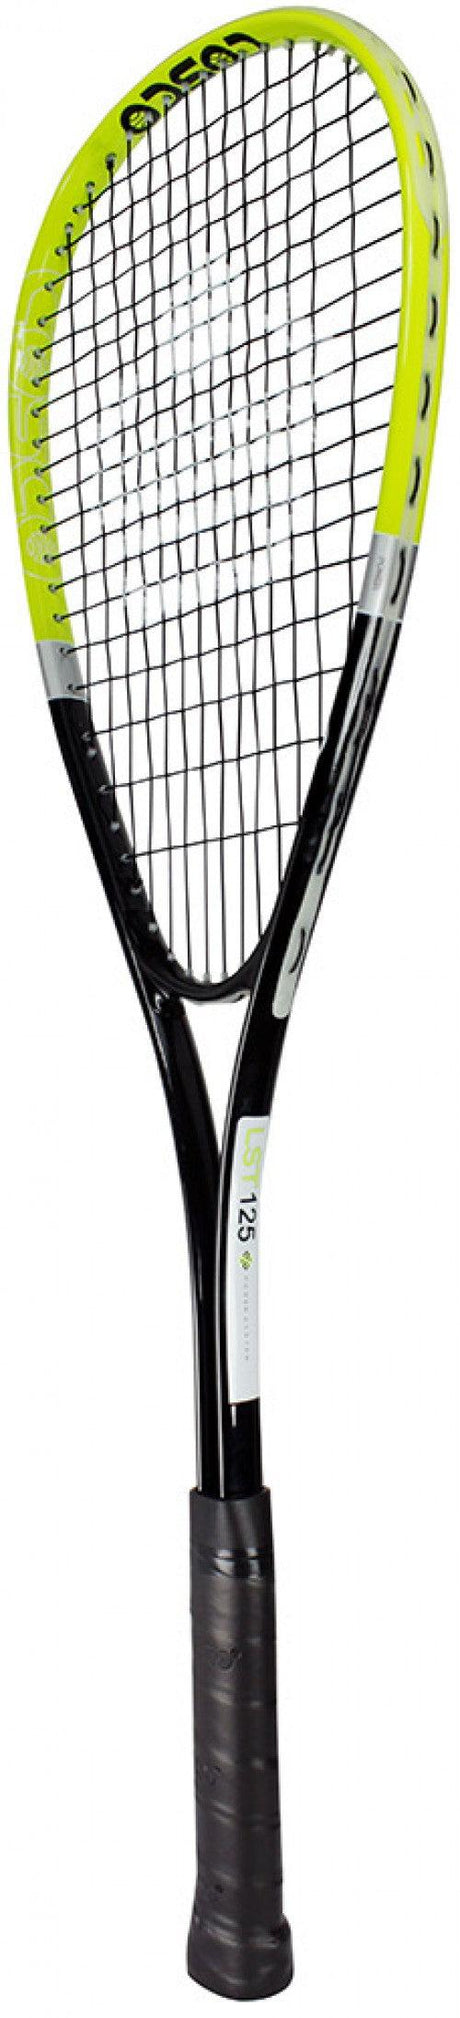 Cosco LST 125 Squash Racket - Mill Sports